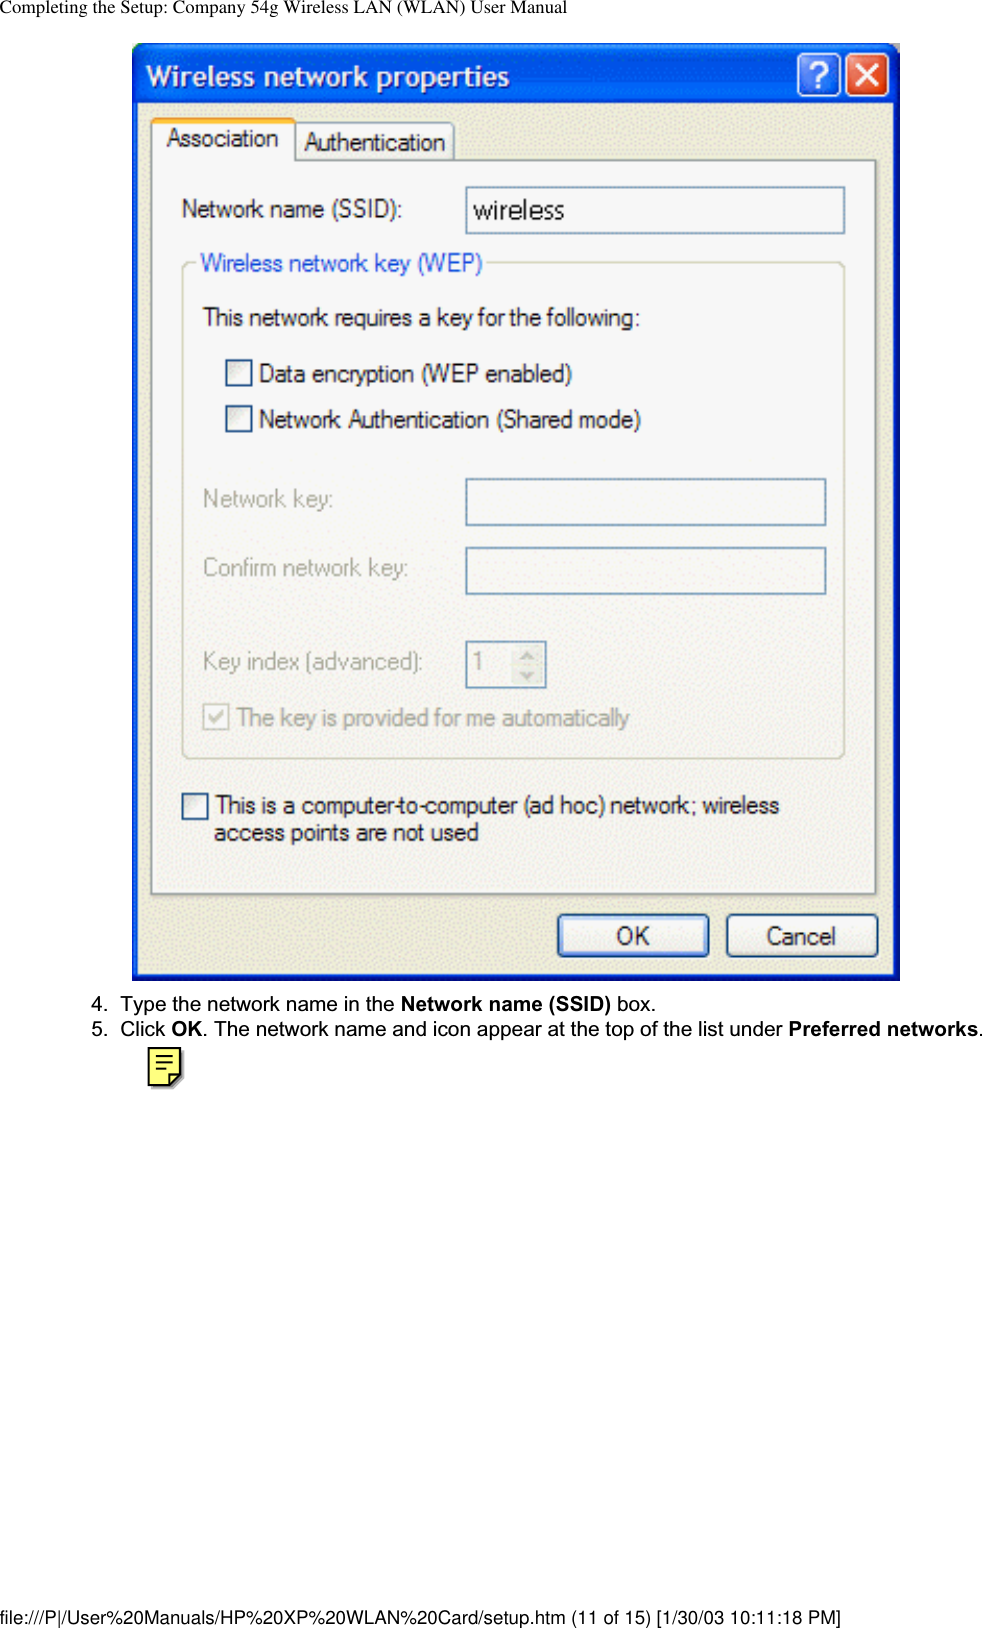 Completing the Setup: Company 54g Wireless LAN (WLAN) User Manual4. Type the network name in the Network name (SSID) box.5. Click OK. The network name and icon appear at the top of the list under Preferred networks.file:///P|/User%20Manuals/HP%20XP%20WLAN%20Card/setup.htm (11 of 15) [1/30/03 10:11:18 PM]